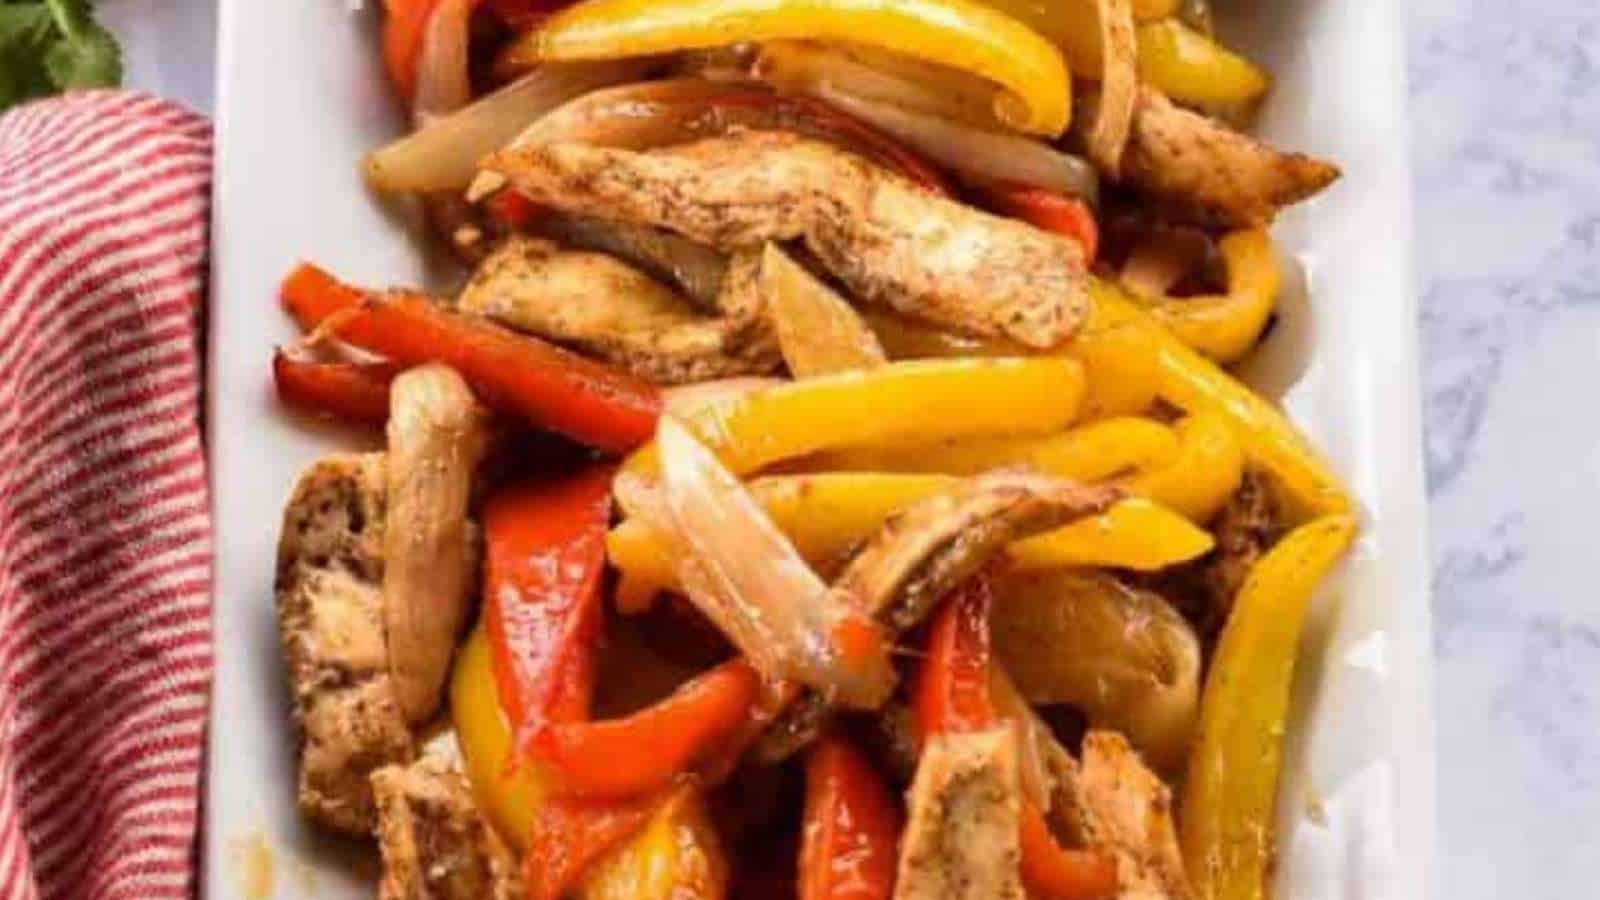 Chicken and peppers on a white plate.